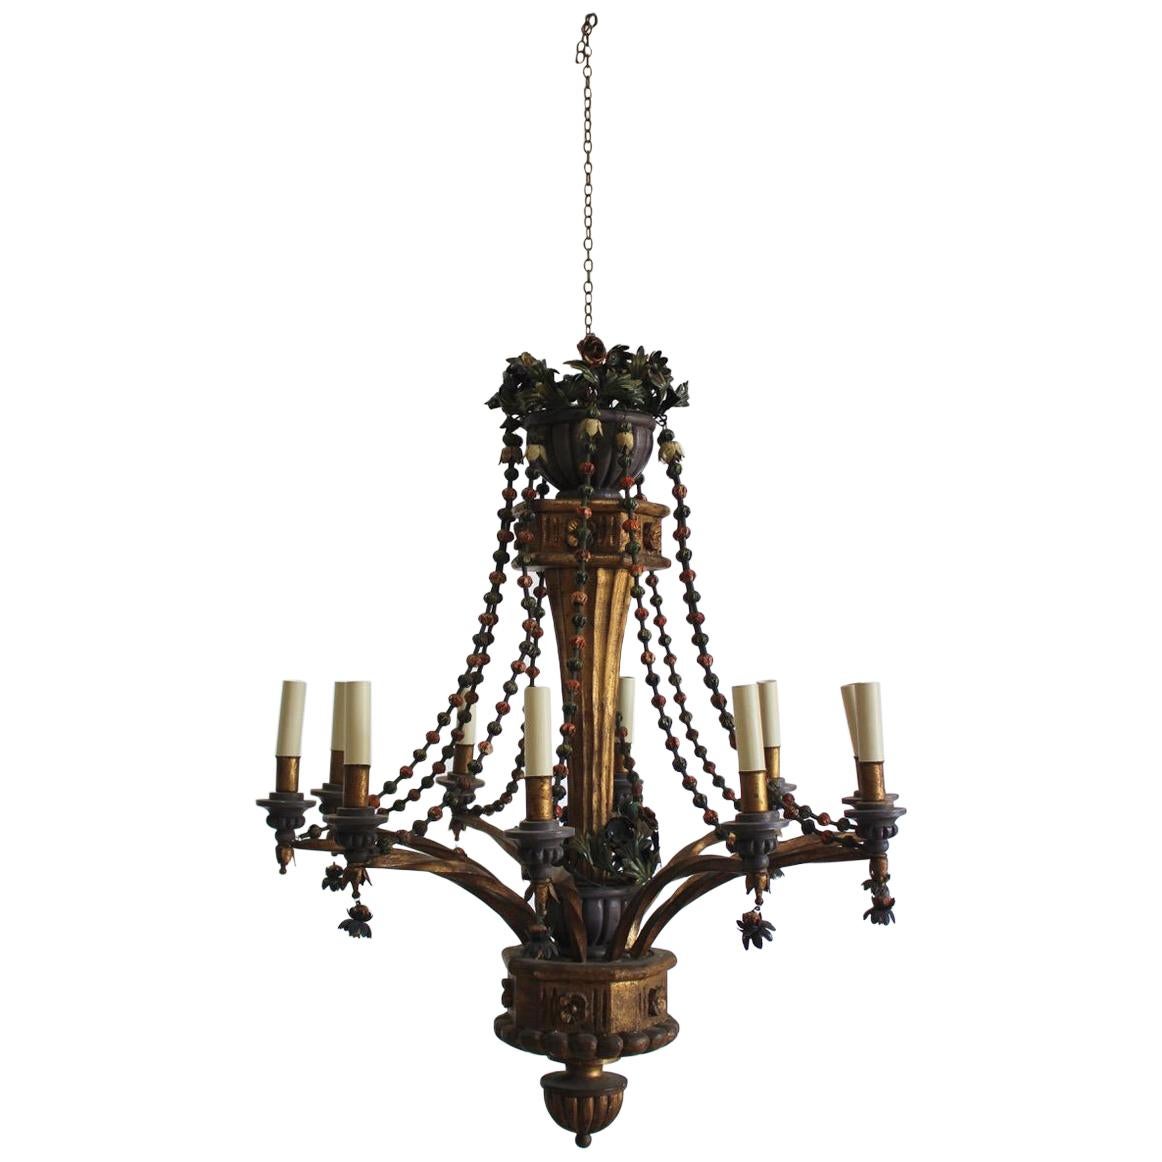 Italian Eight-Arm Giltwood and Tole Chandelier, circa 1940s